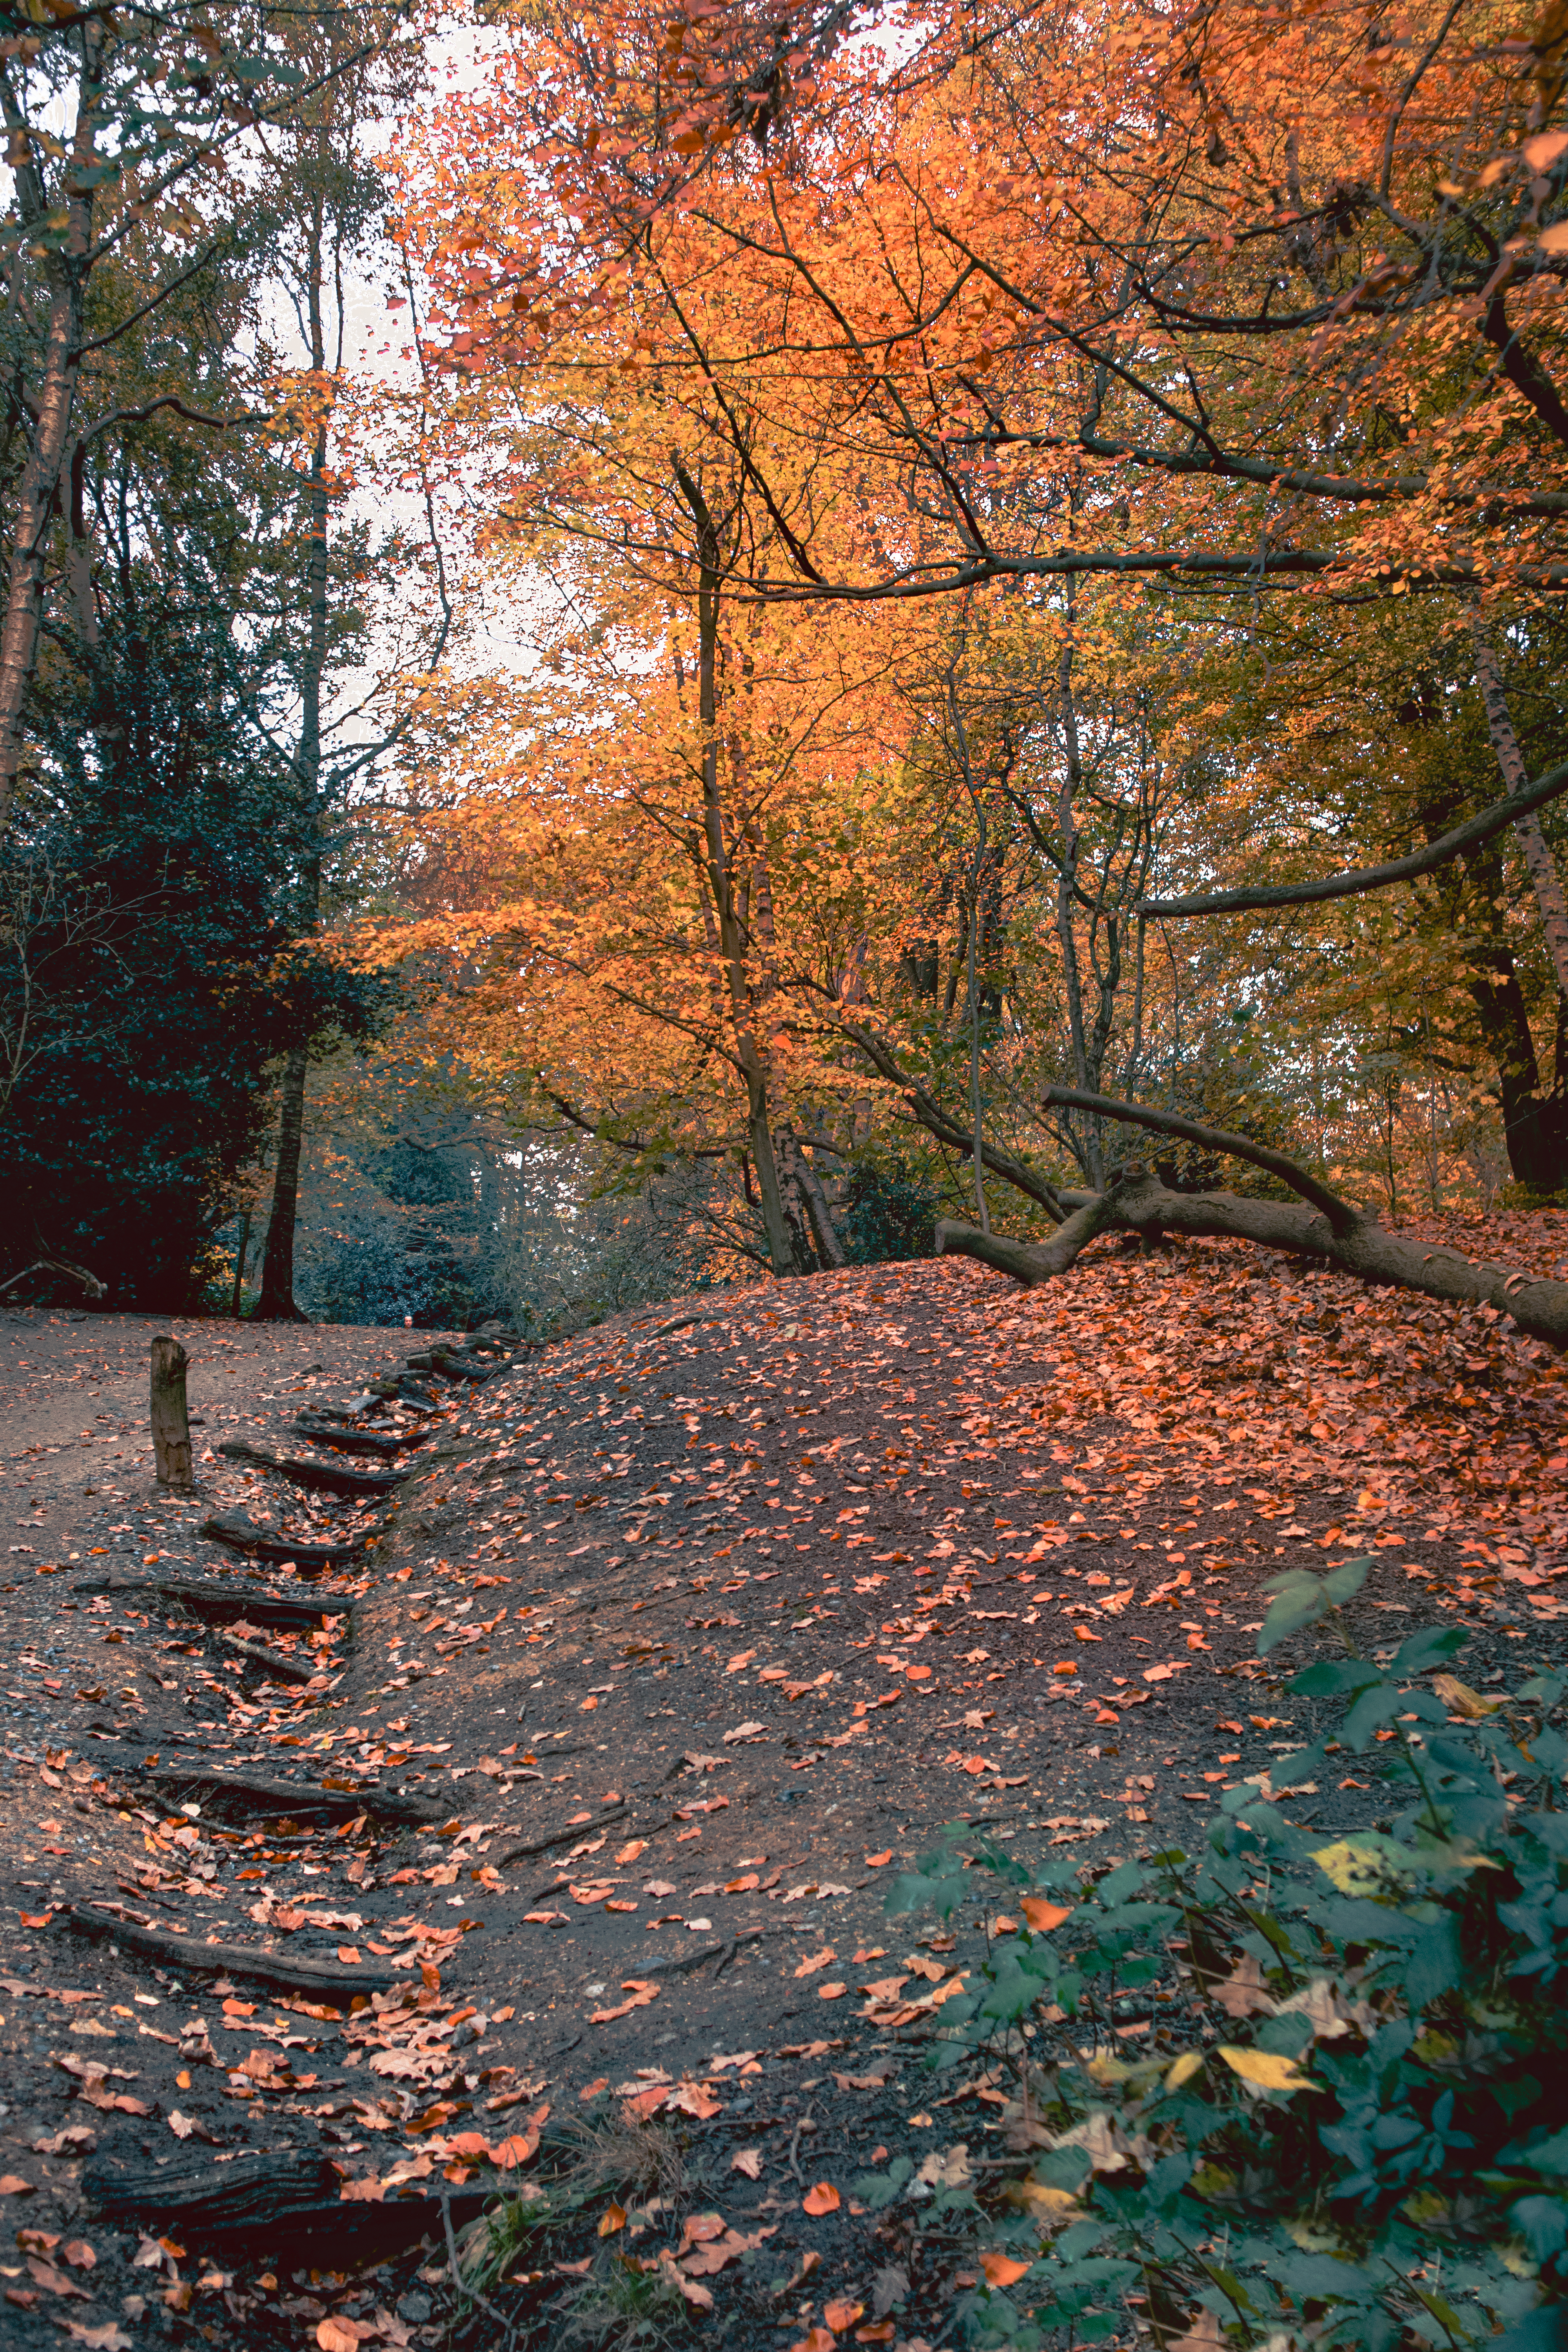 Autumn woodlands with a path of wooden steps in the middle